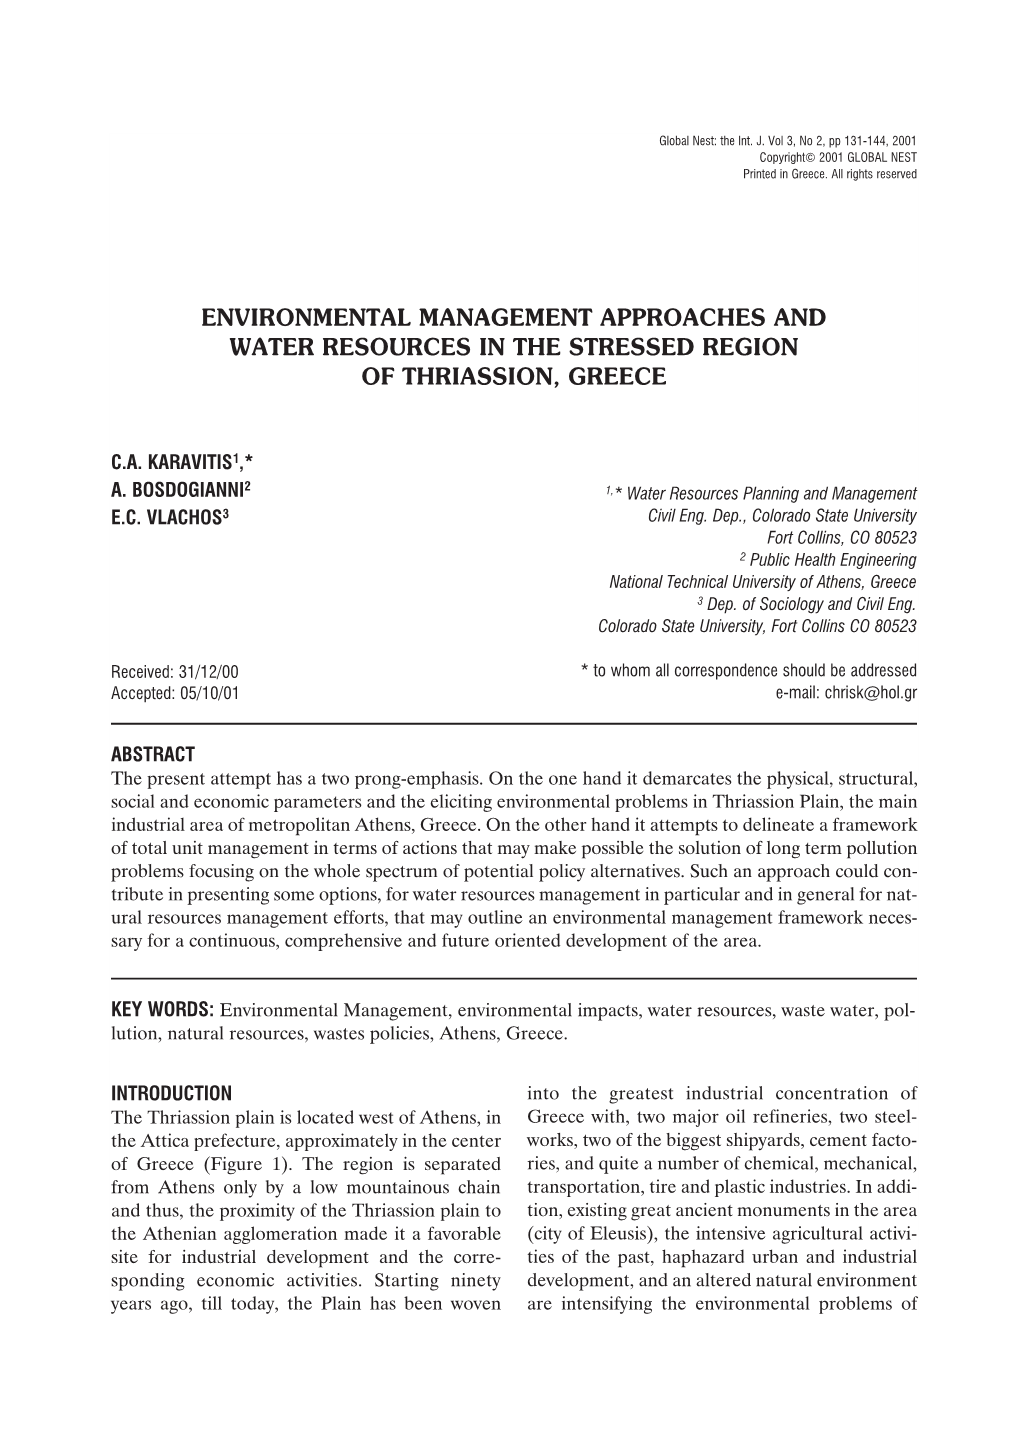 Environmental Management Approaches and Water Resources in the Stressed Region of Thriassion, Greece